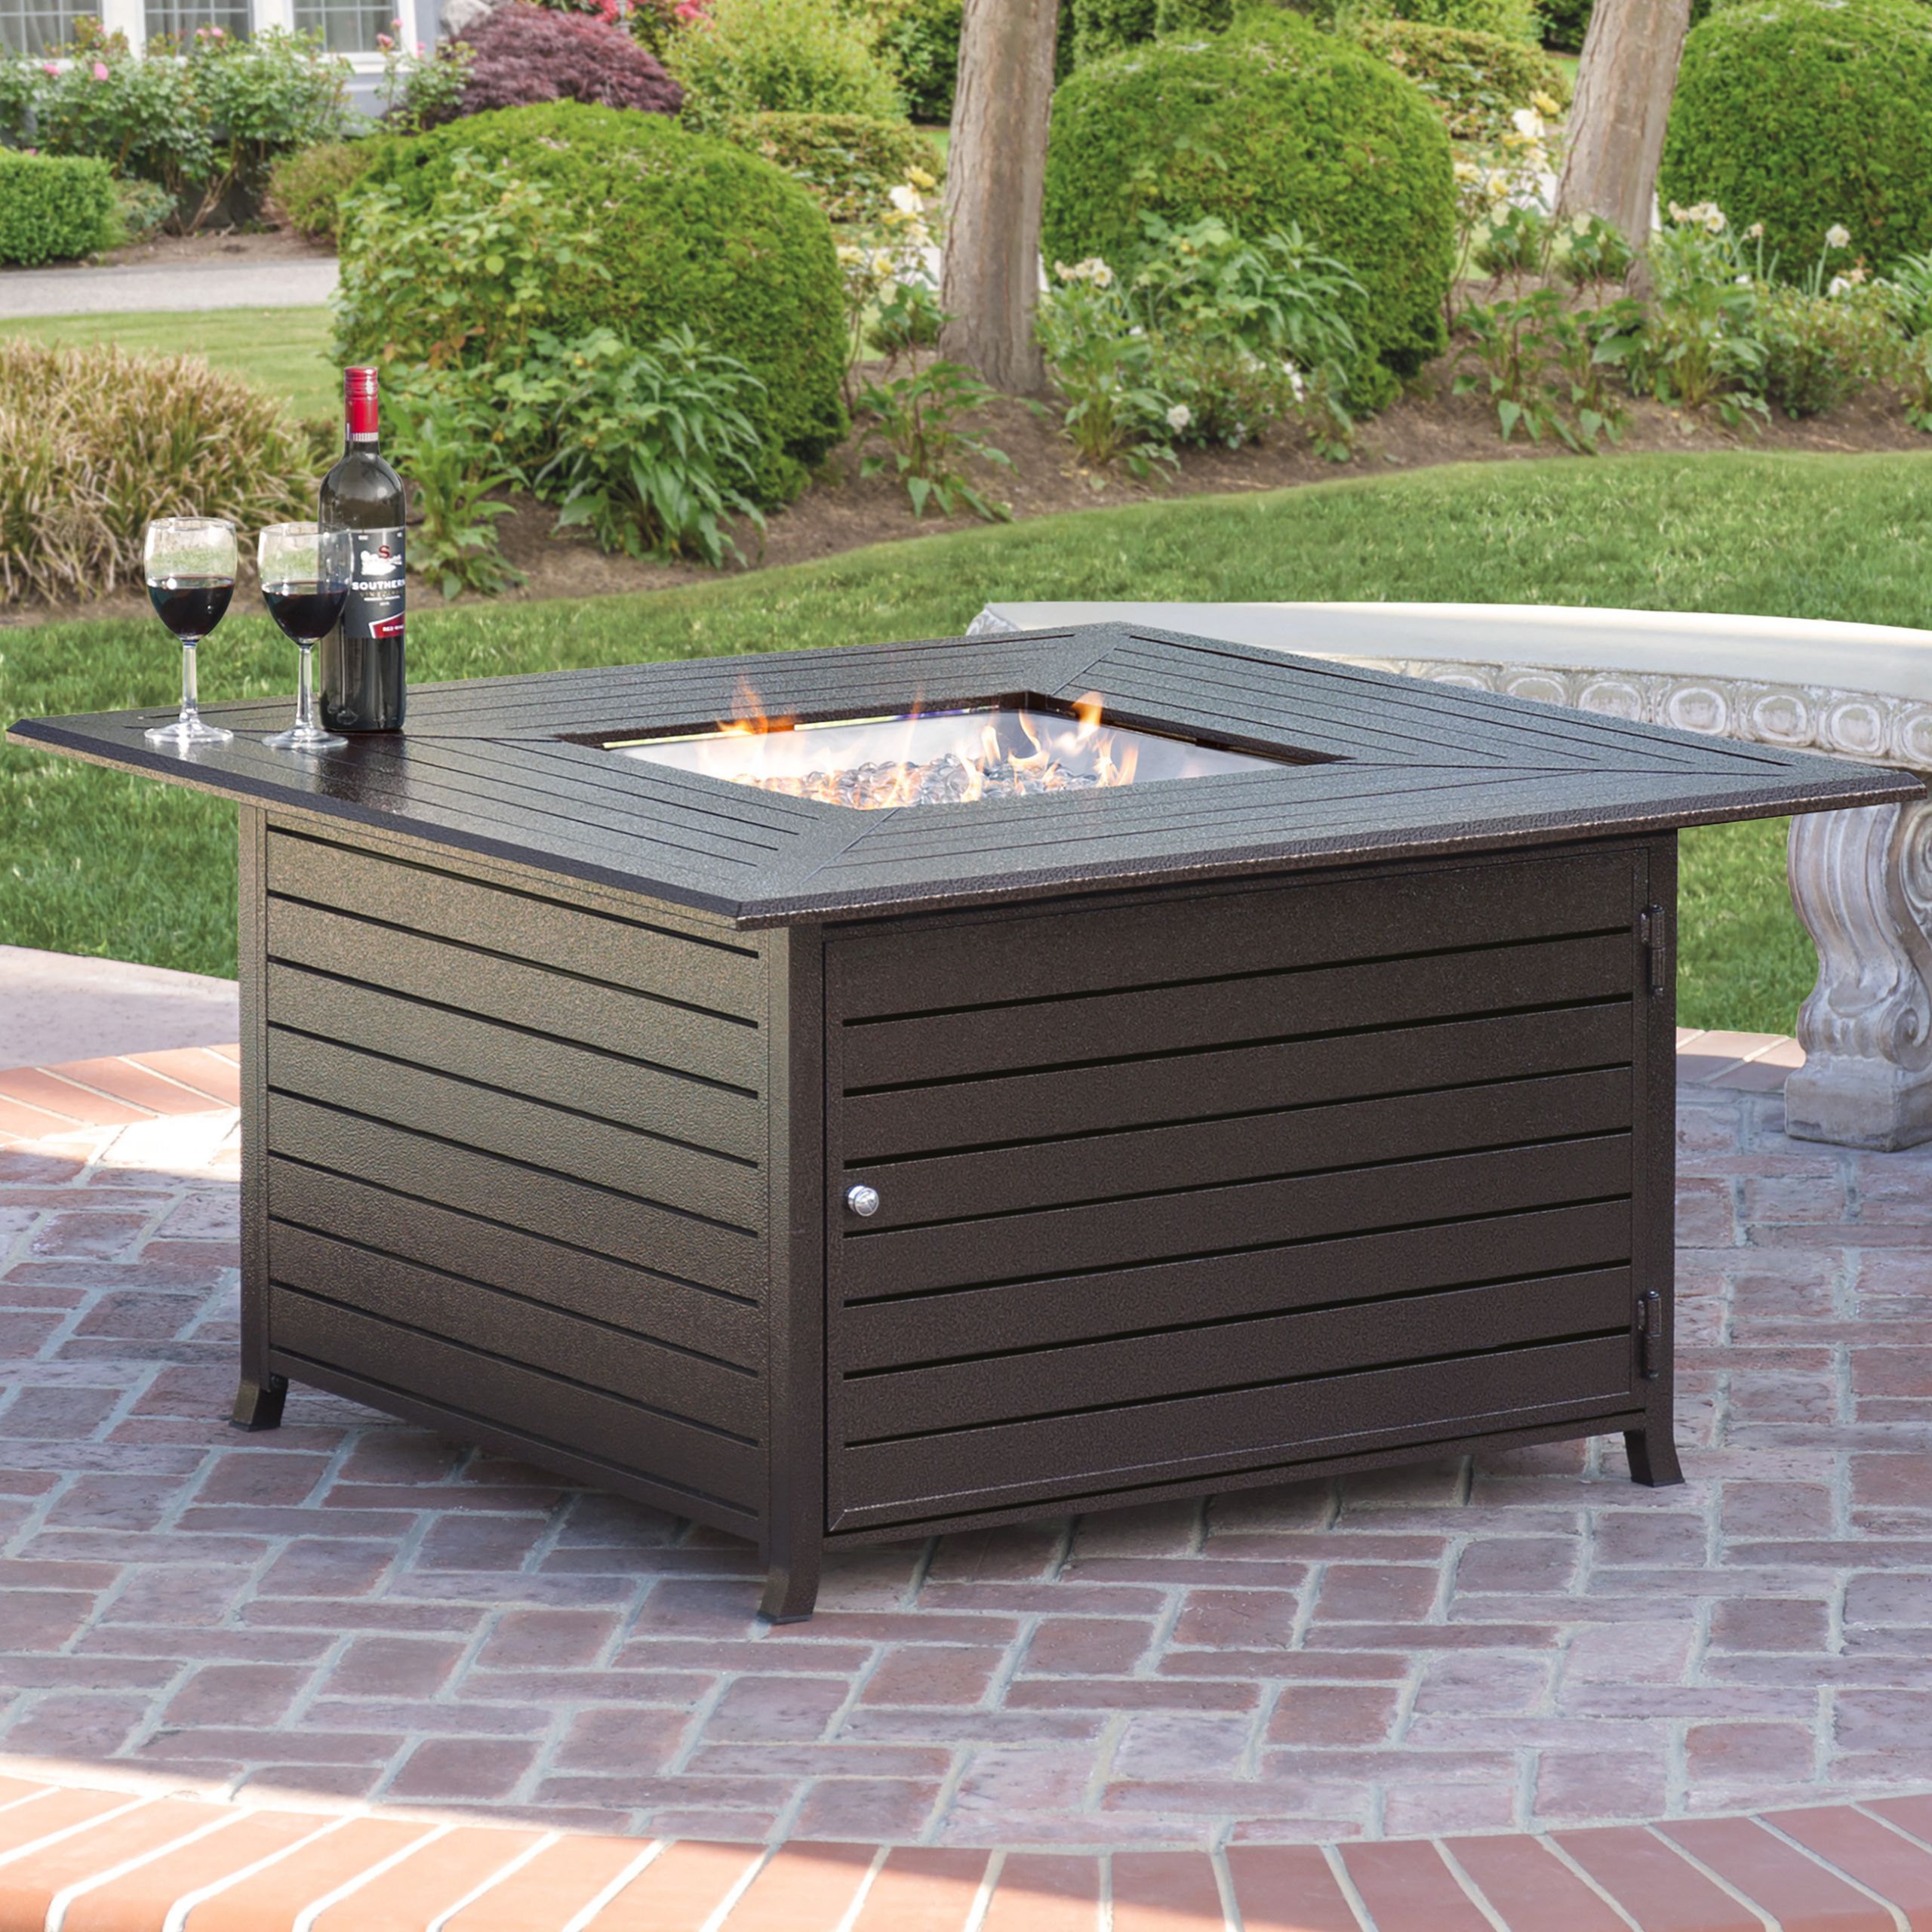 Outdoor Patio Gas Fire Pit
 Best Choice Products Extruded Aluminum Gas Outdoor Fire